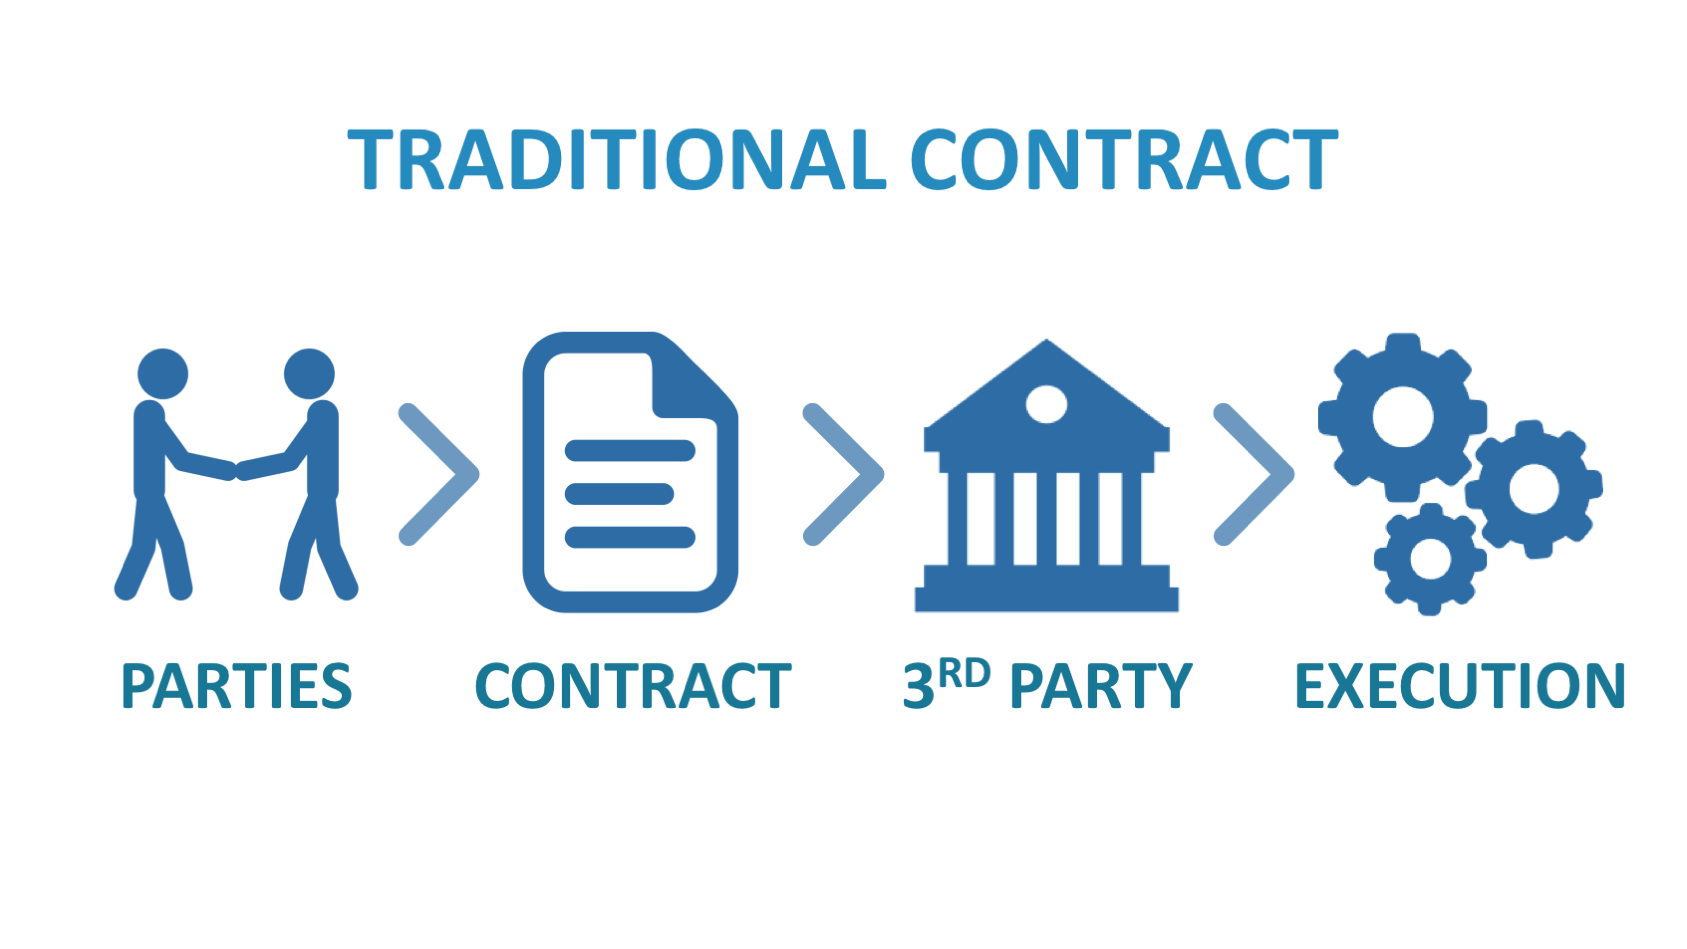 What are Smart Contracts? 1